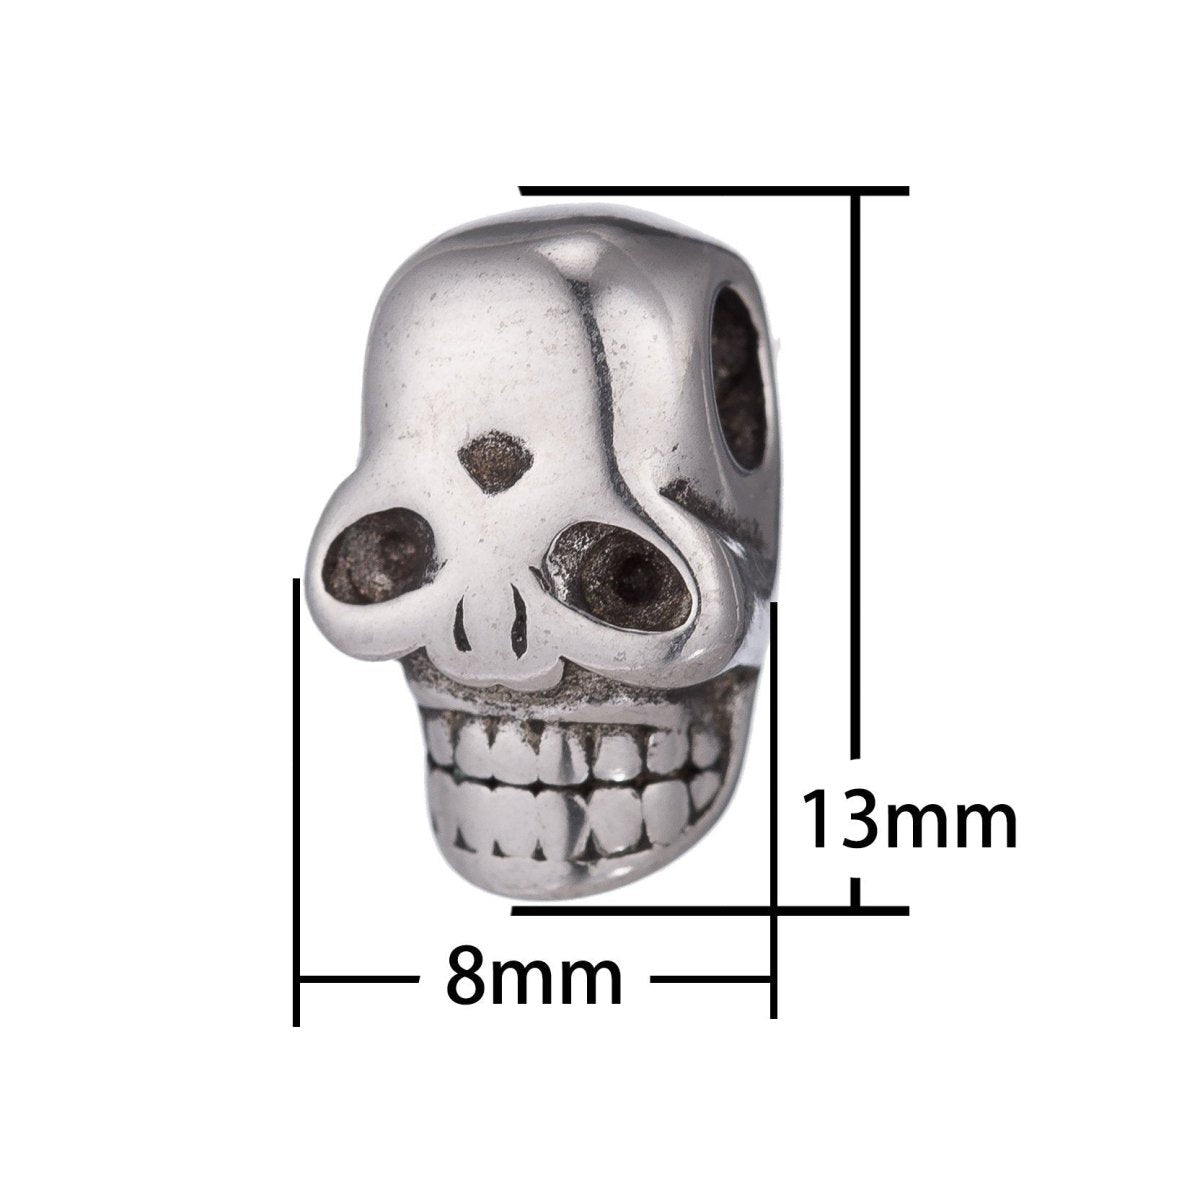 1pc Silver Stainless Steel 3D Smiling Skull Head, Scary, Halloween Party, Bracelet Charm Bead Finding Connector Spacer for Jewelry Making - DLUXCA